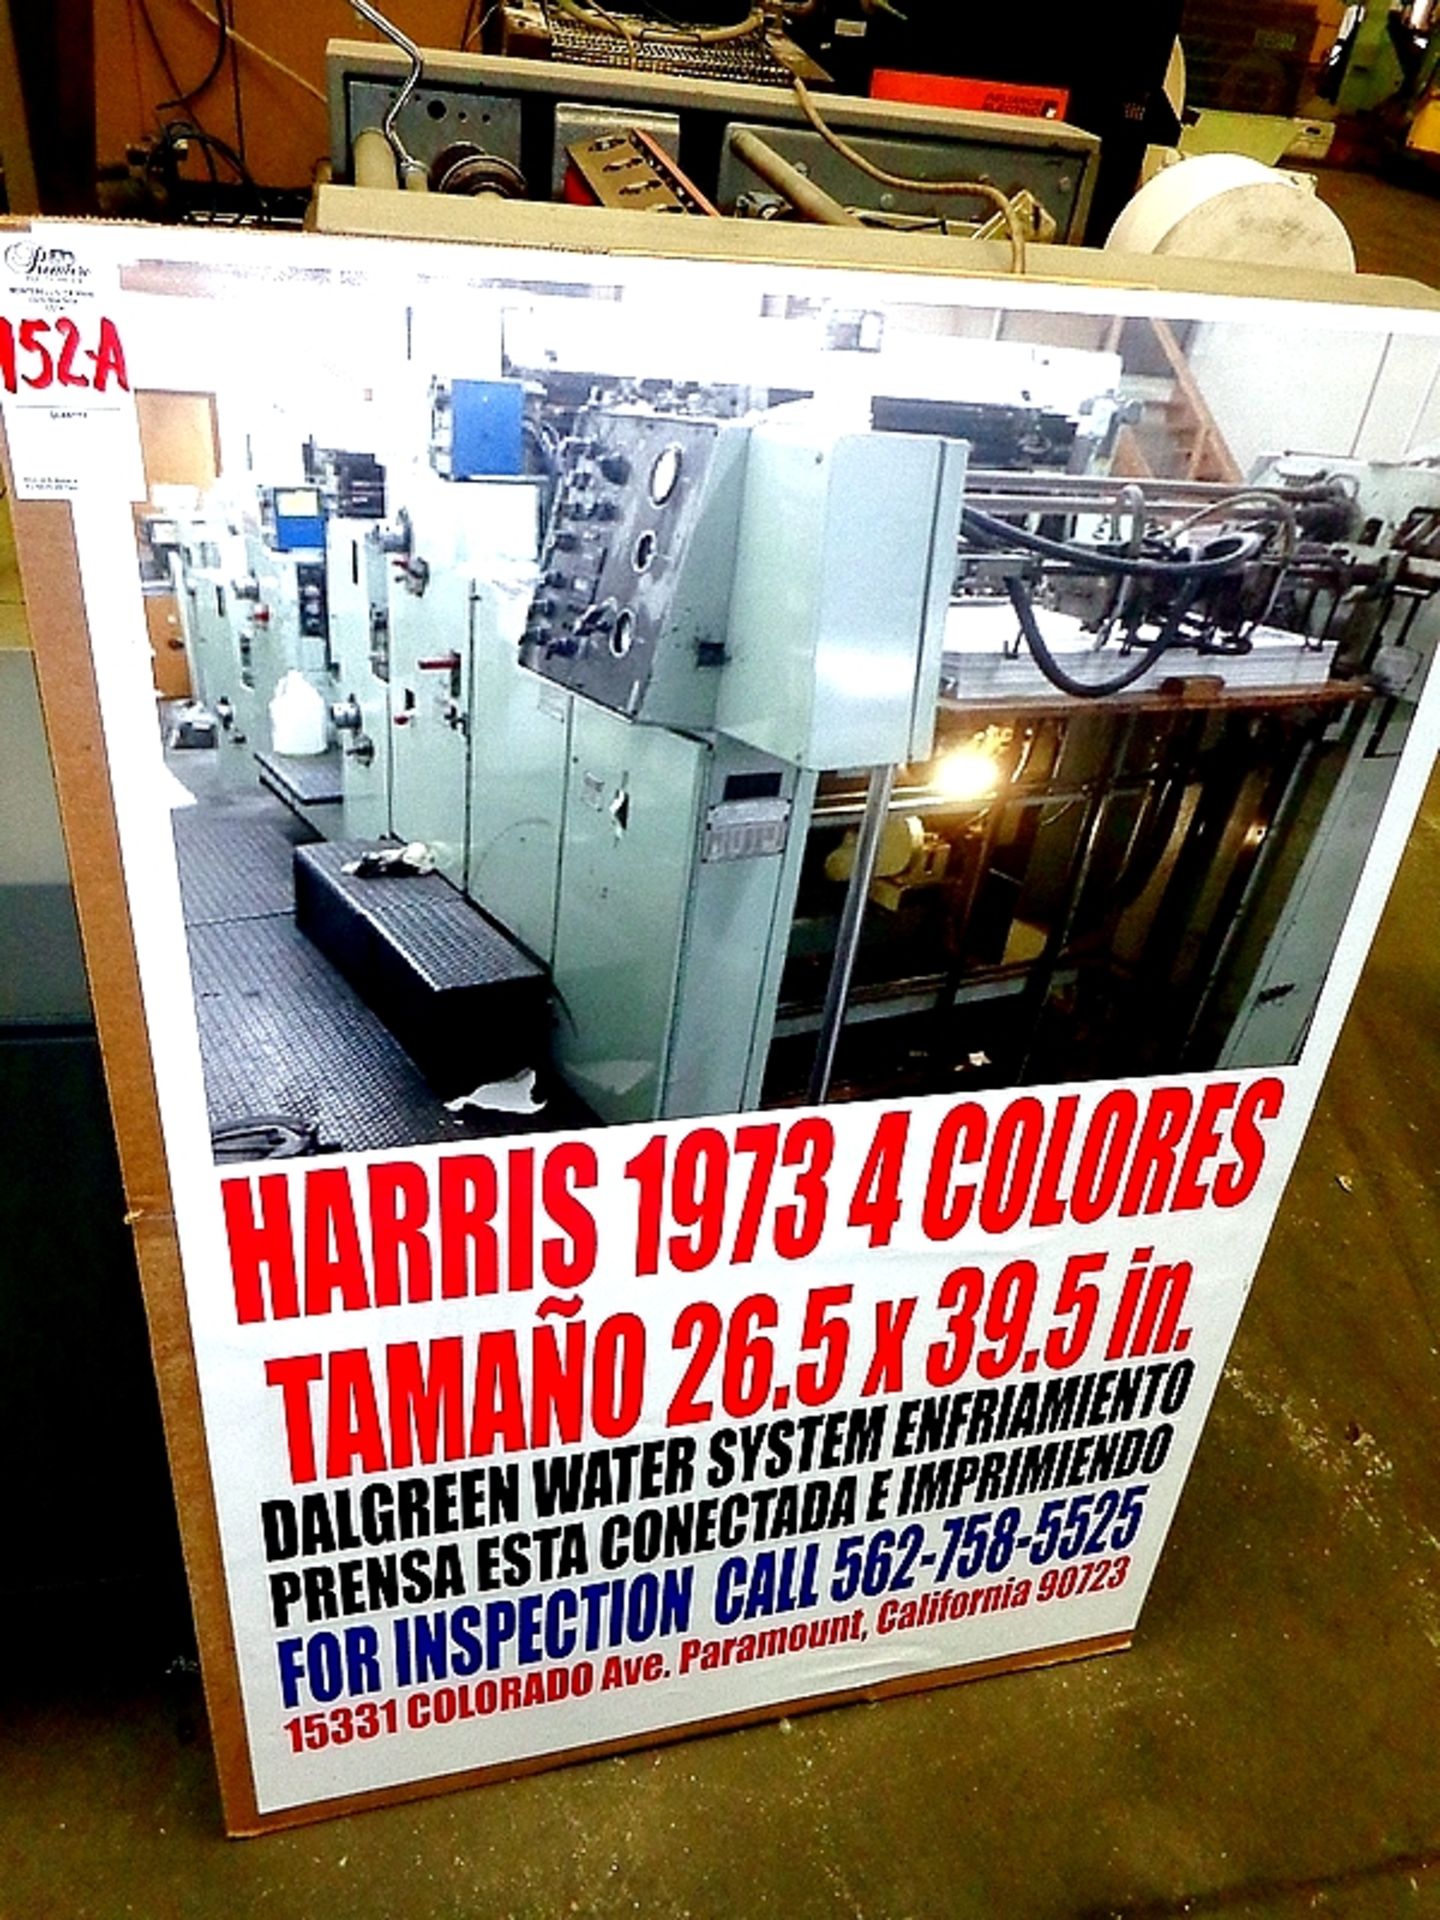 HARRIS 1973 4-COLOR DALGREEN WATER SYSTEM